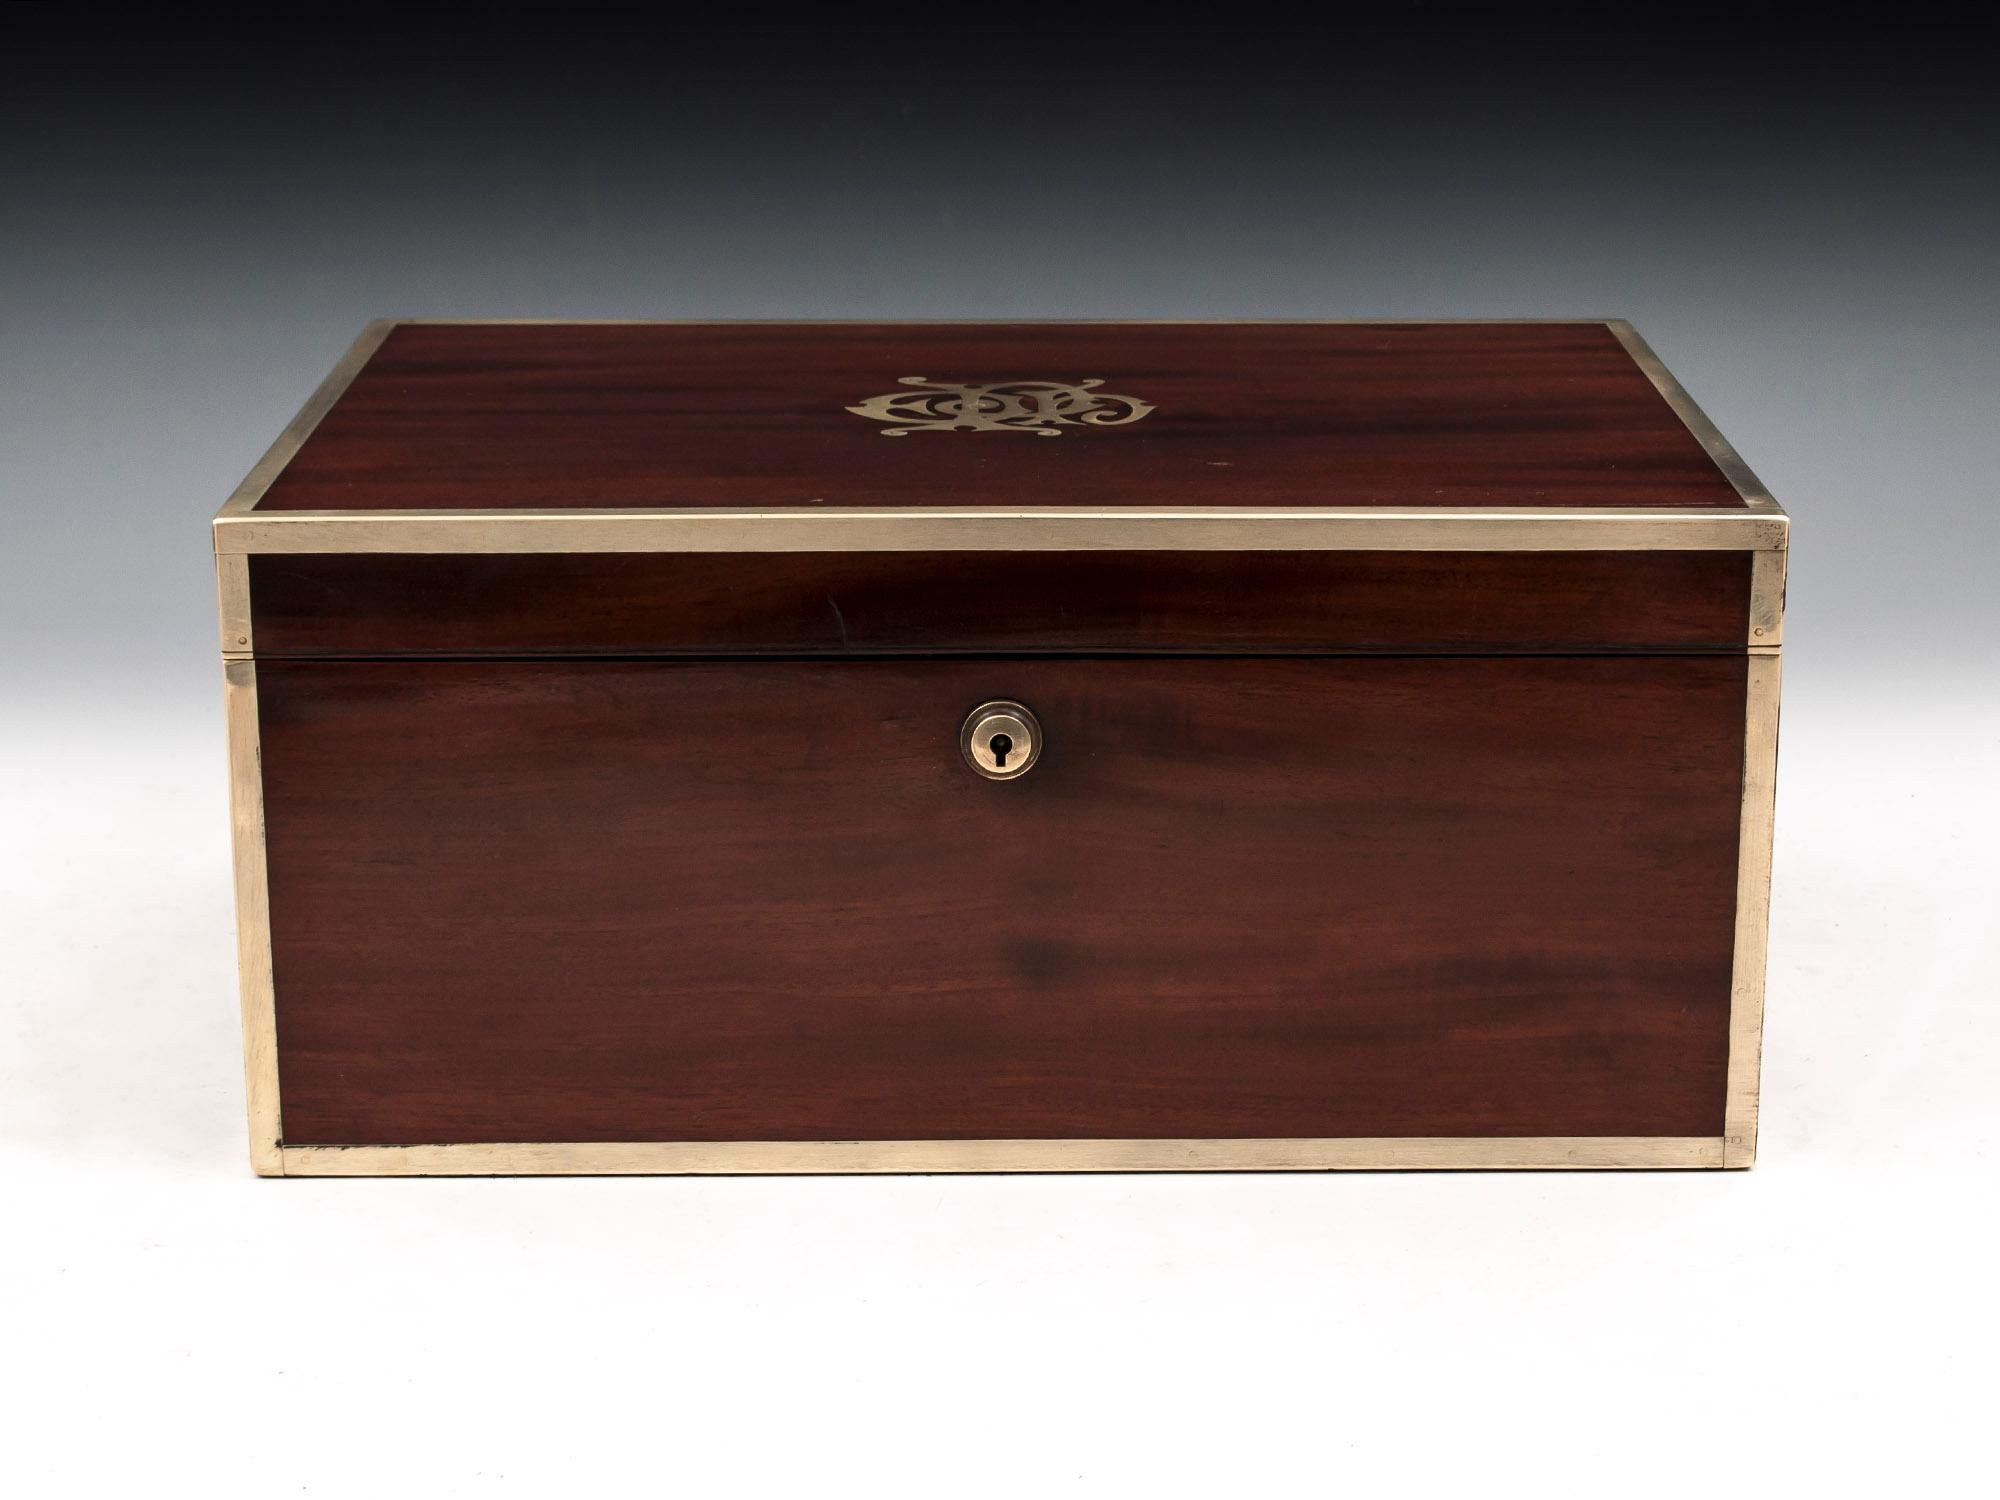 Antique Military Box in solid mahogany with bold brass edging, campaign flush fitting cary handles and large monogram which reads EPH 

The military box interior is lined with a luxurious royal blue velvet. The underside of the lid has its original